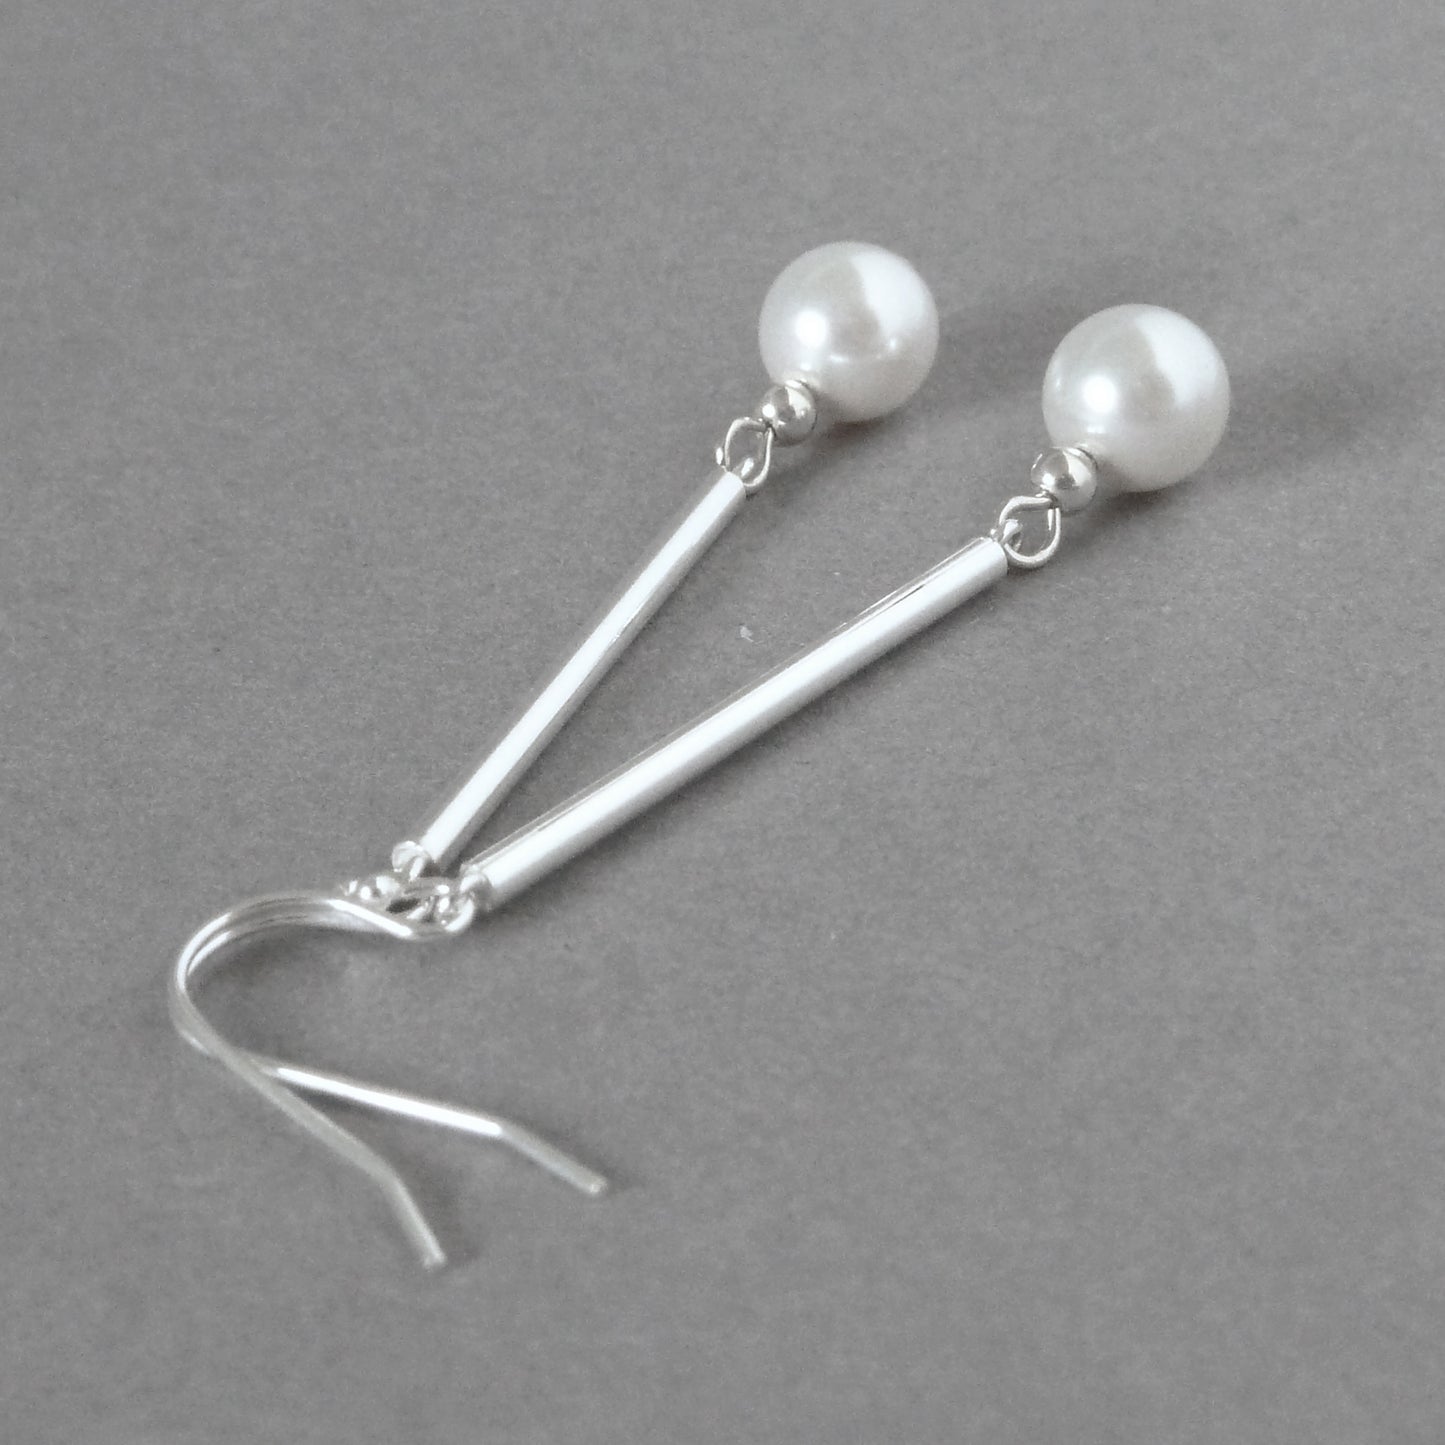 White pearl and silver bar earrings